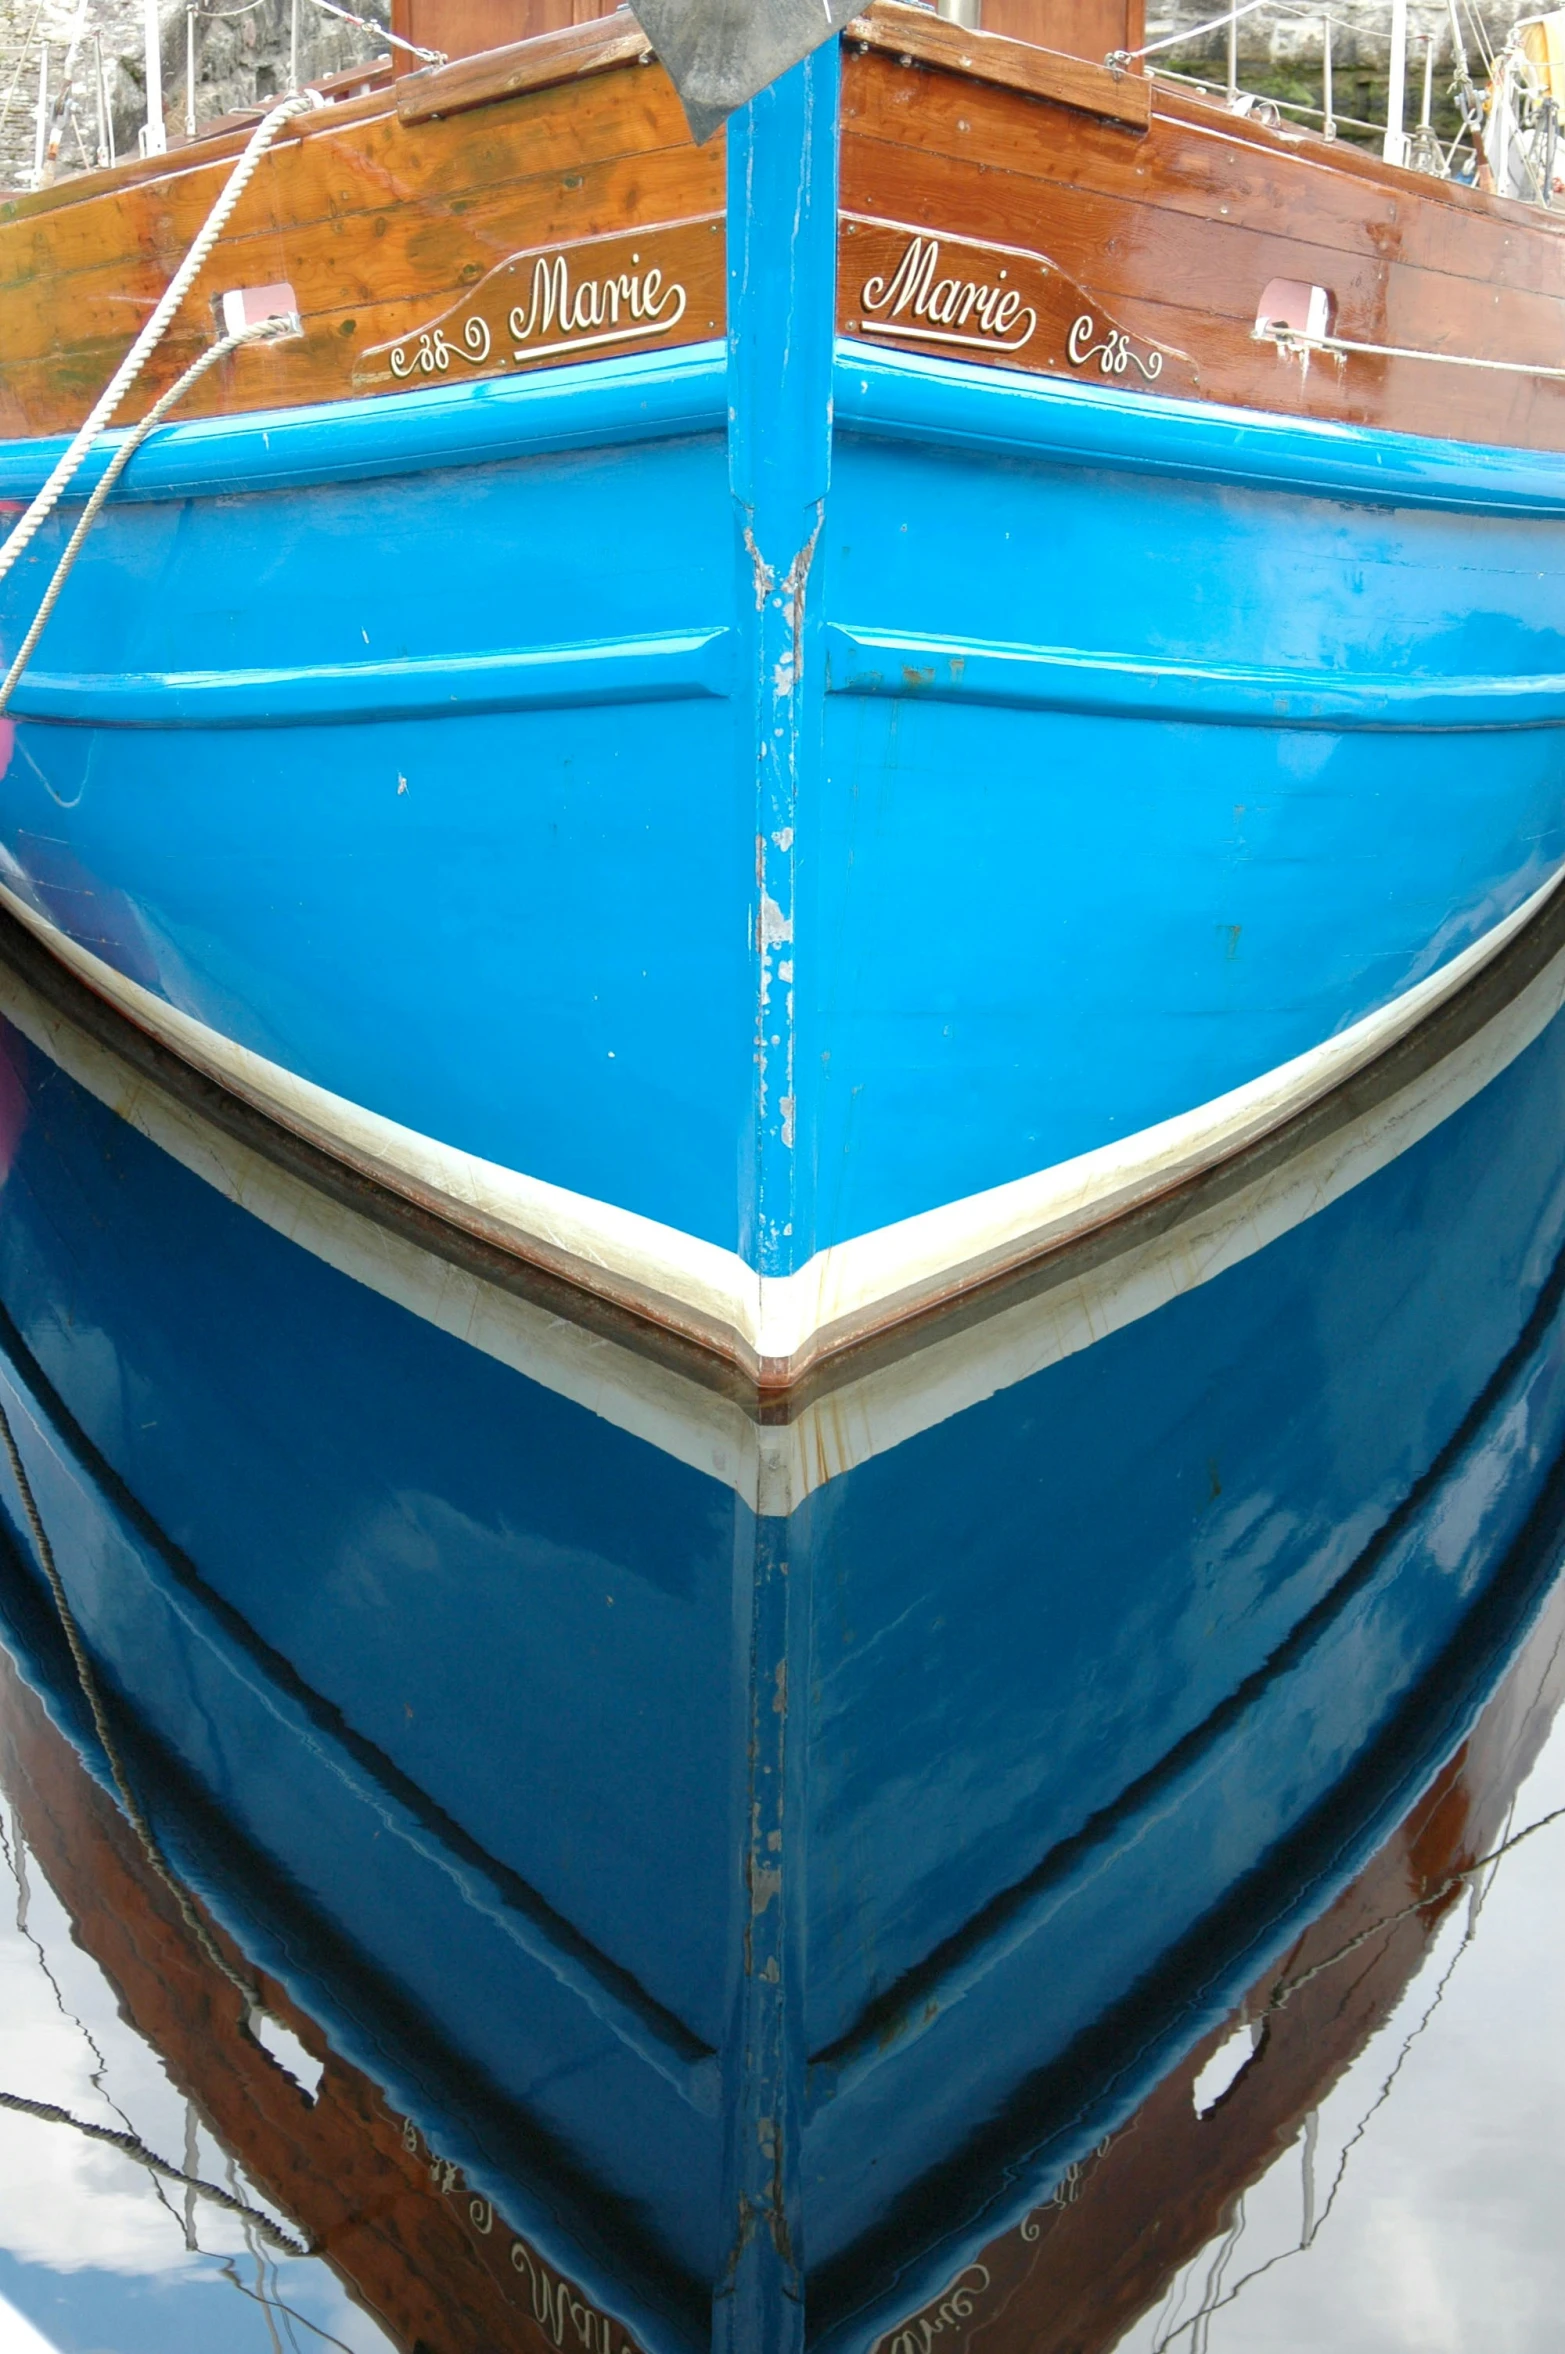 blue boat on water at dock in marina